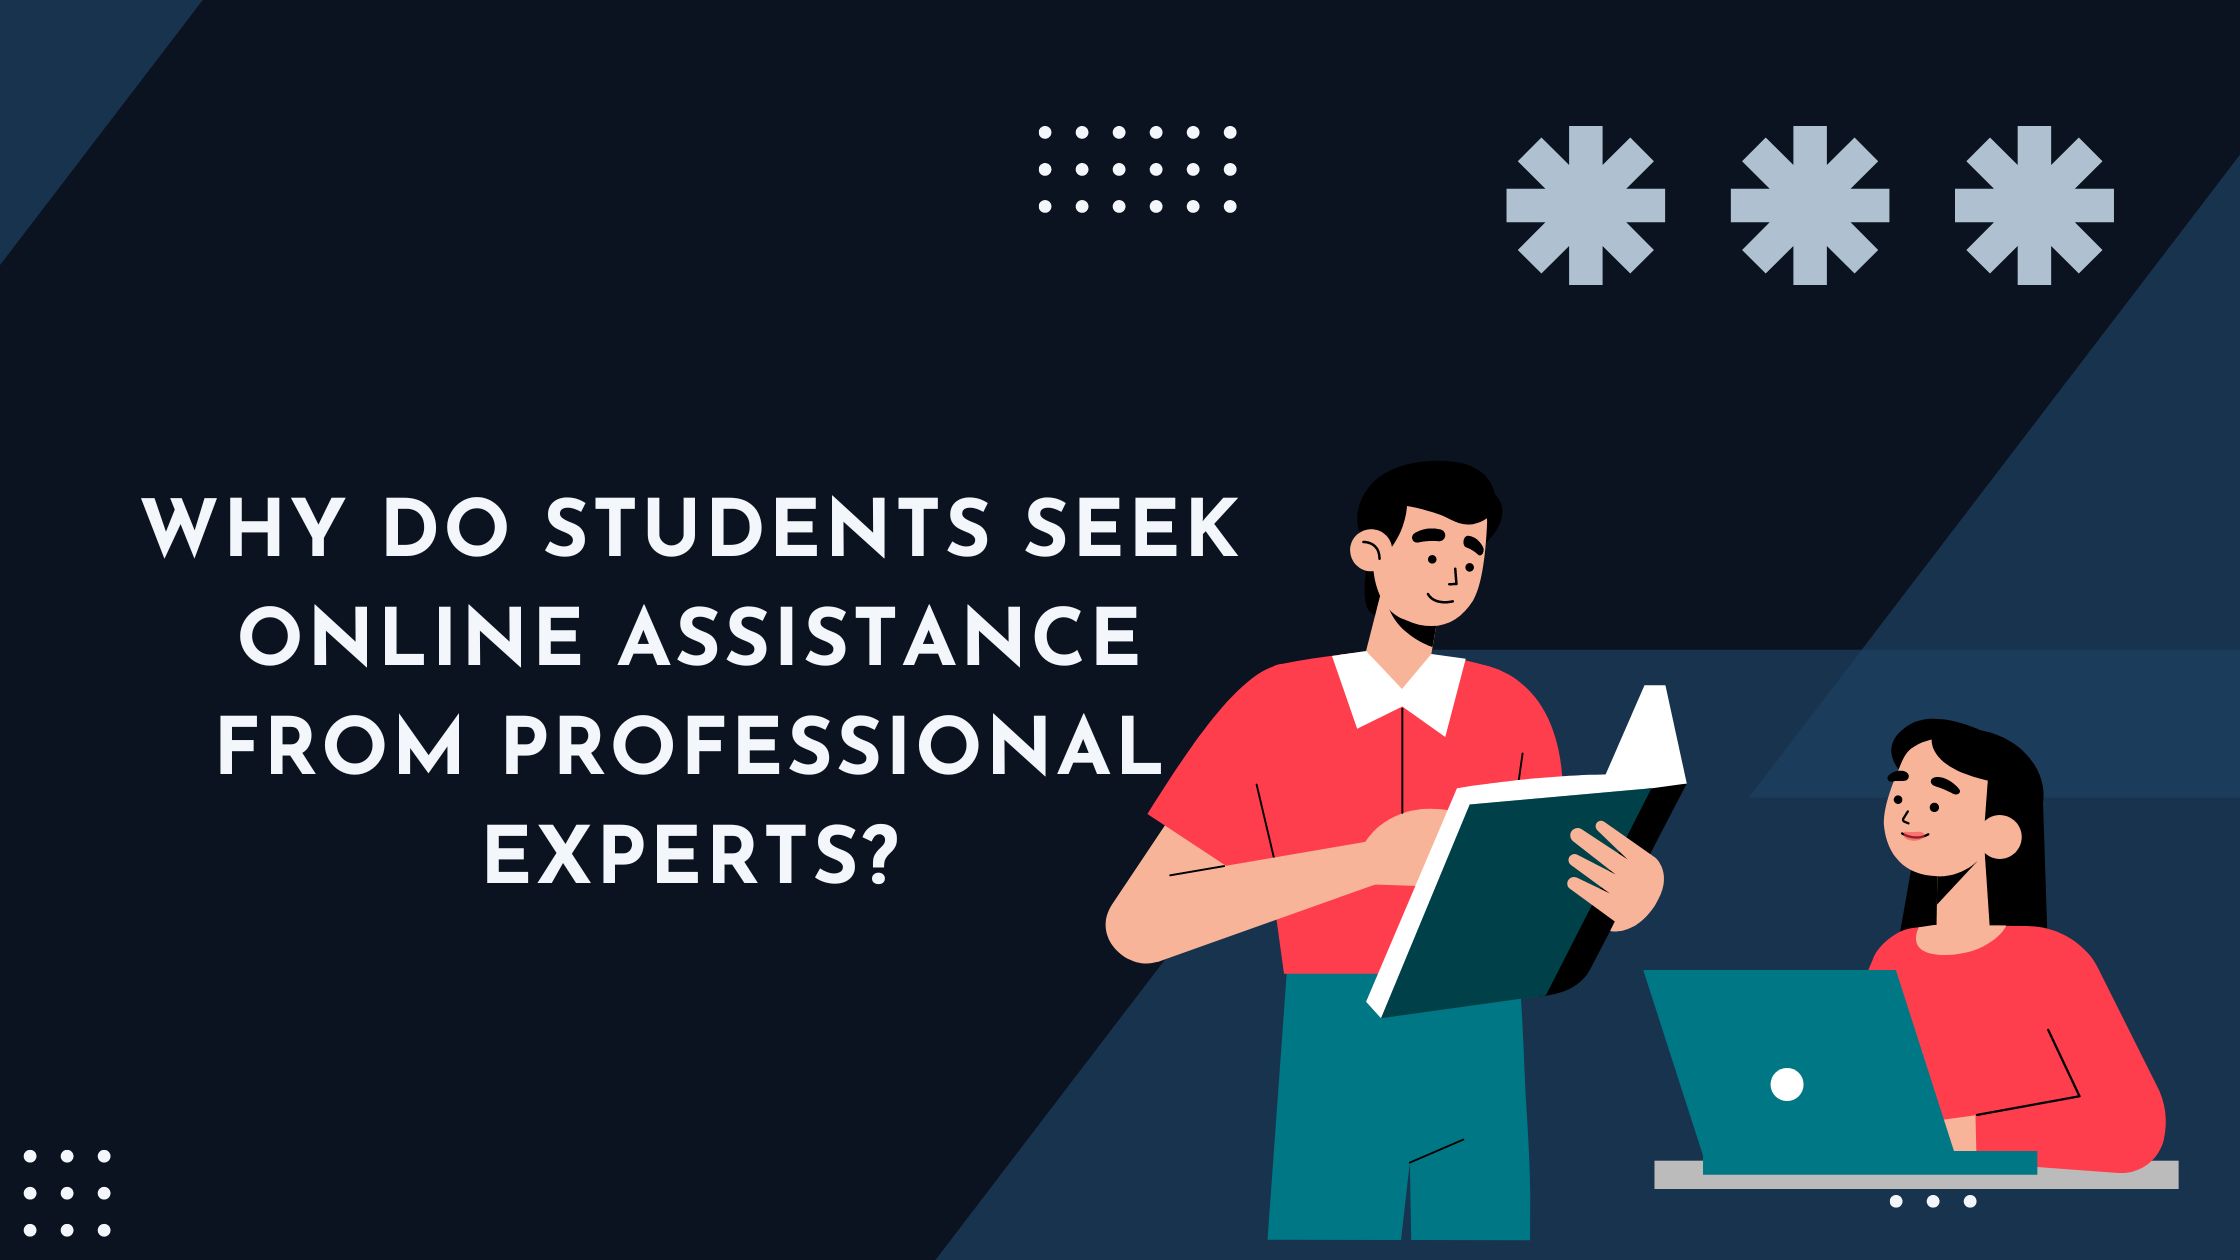 Why Do Students Seek Online Assistance from Professional Experts